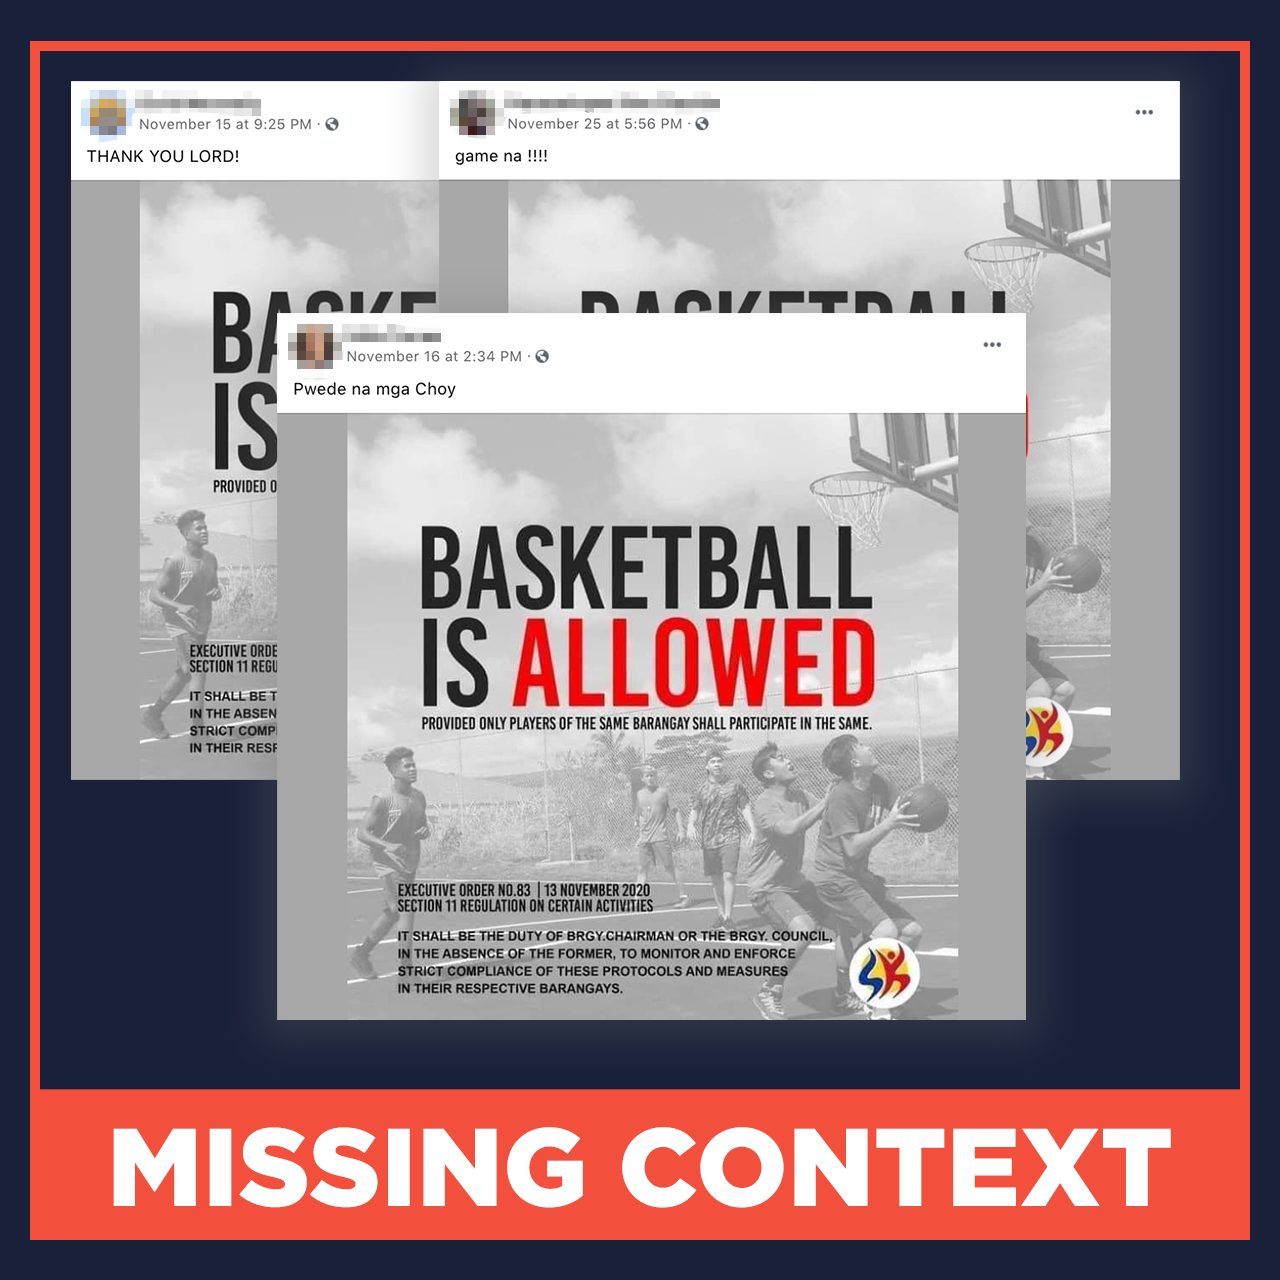 MISSING CONTEXT: Basketball allowed in barangays